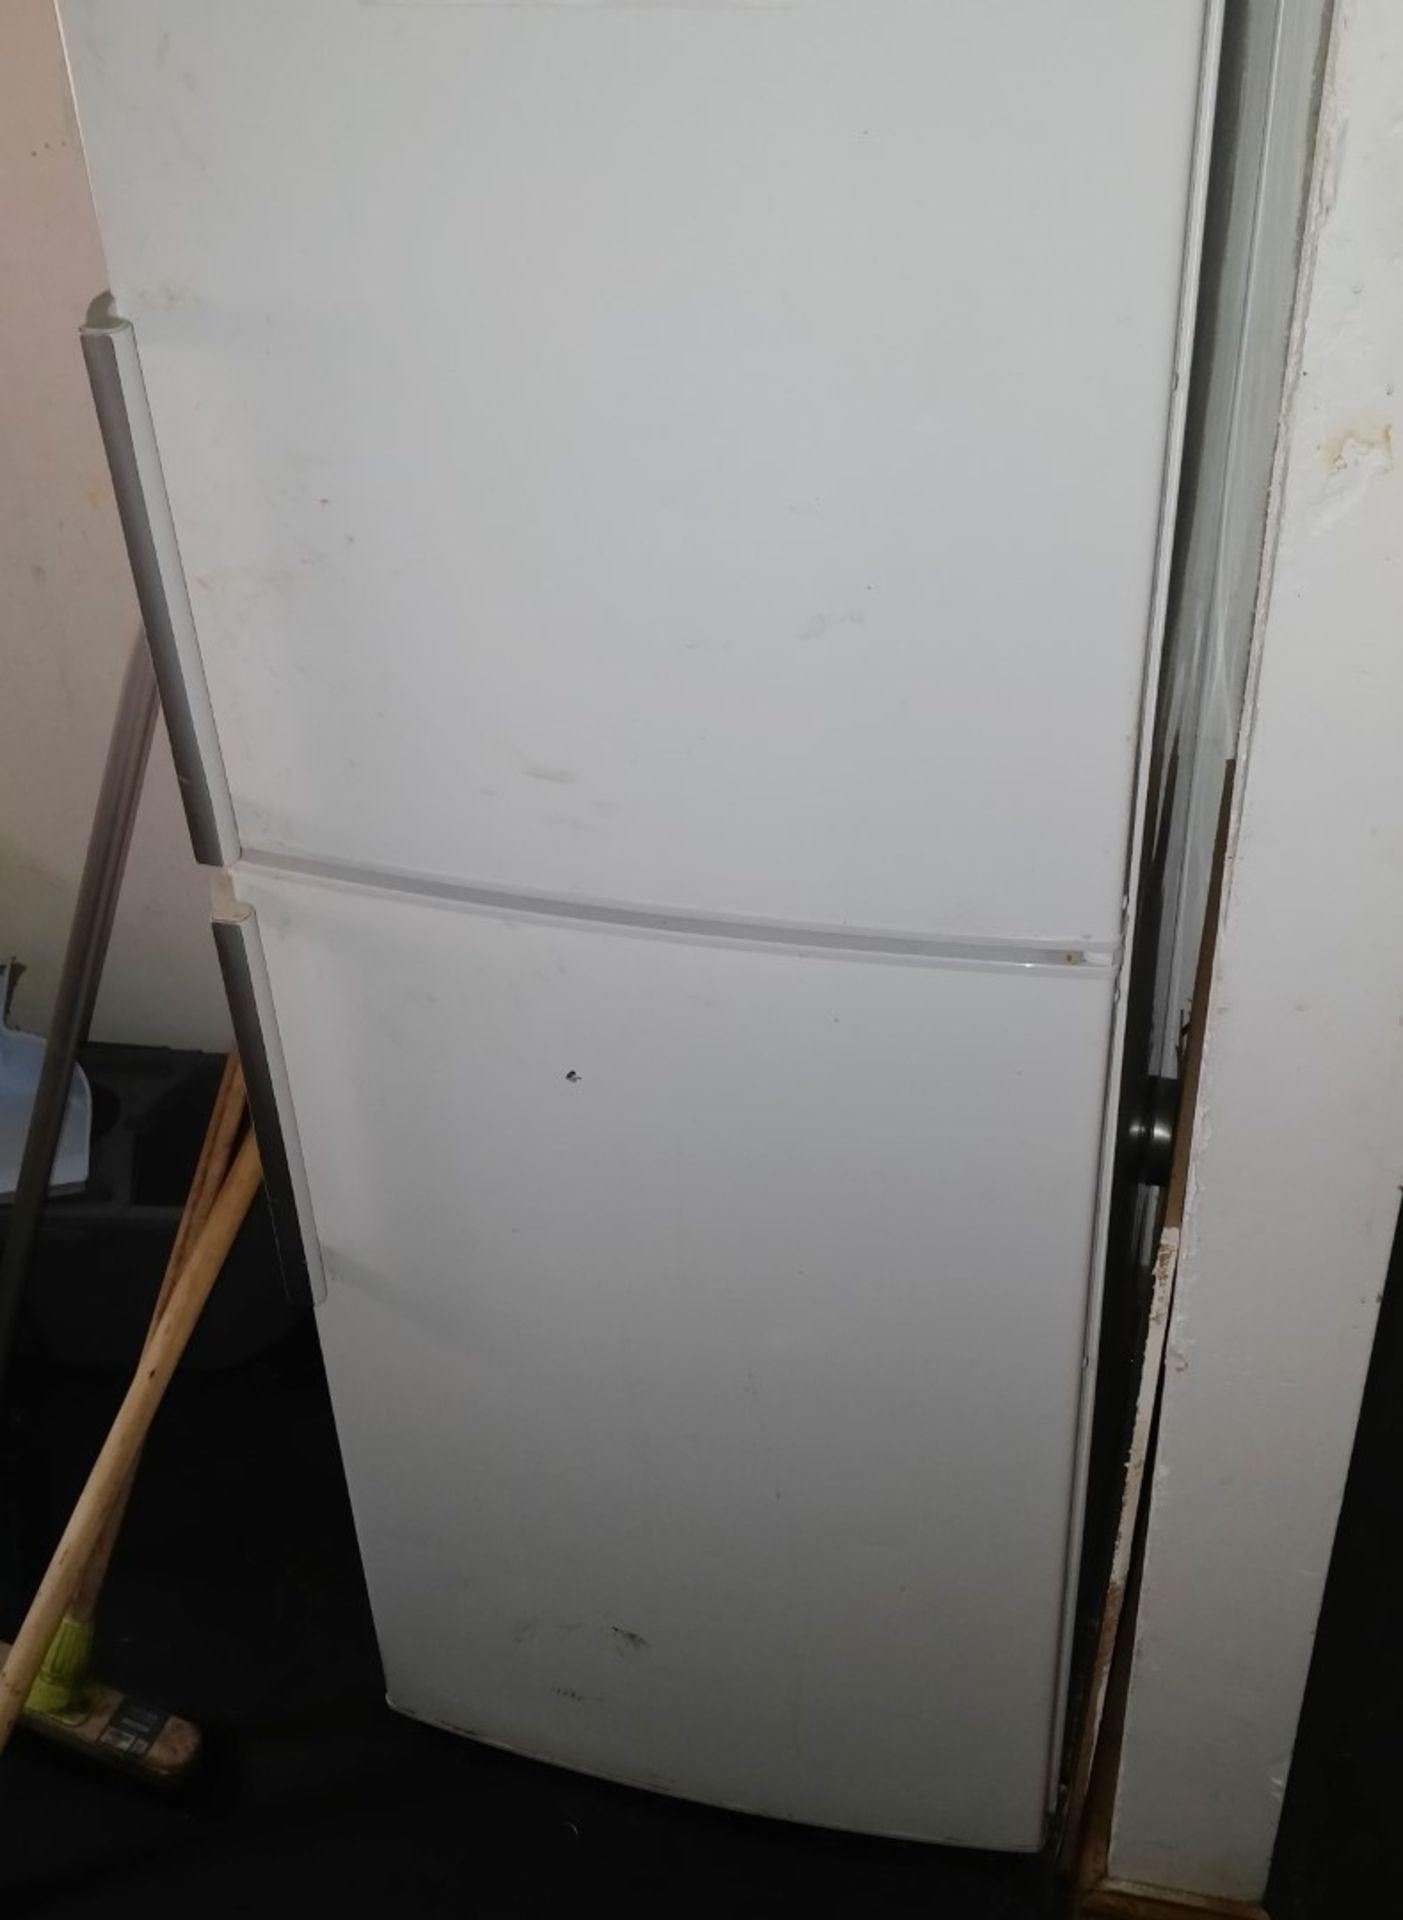 1 x Bosch Upright Fridge Freezer - CL586 - Location: Stockport SK1 This item is to be removed from a - Bild 5 aus 5